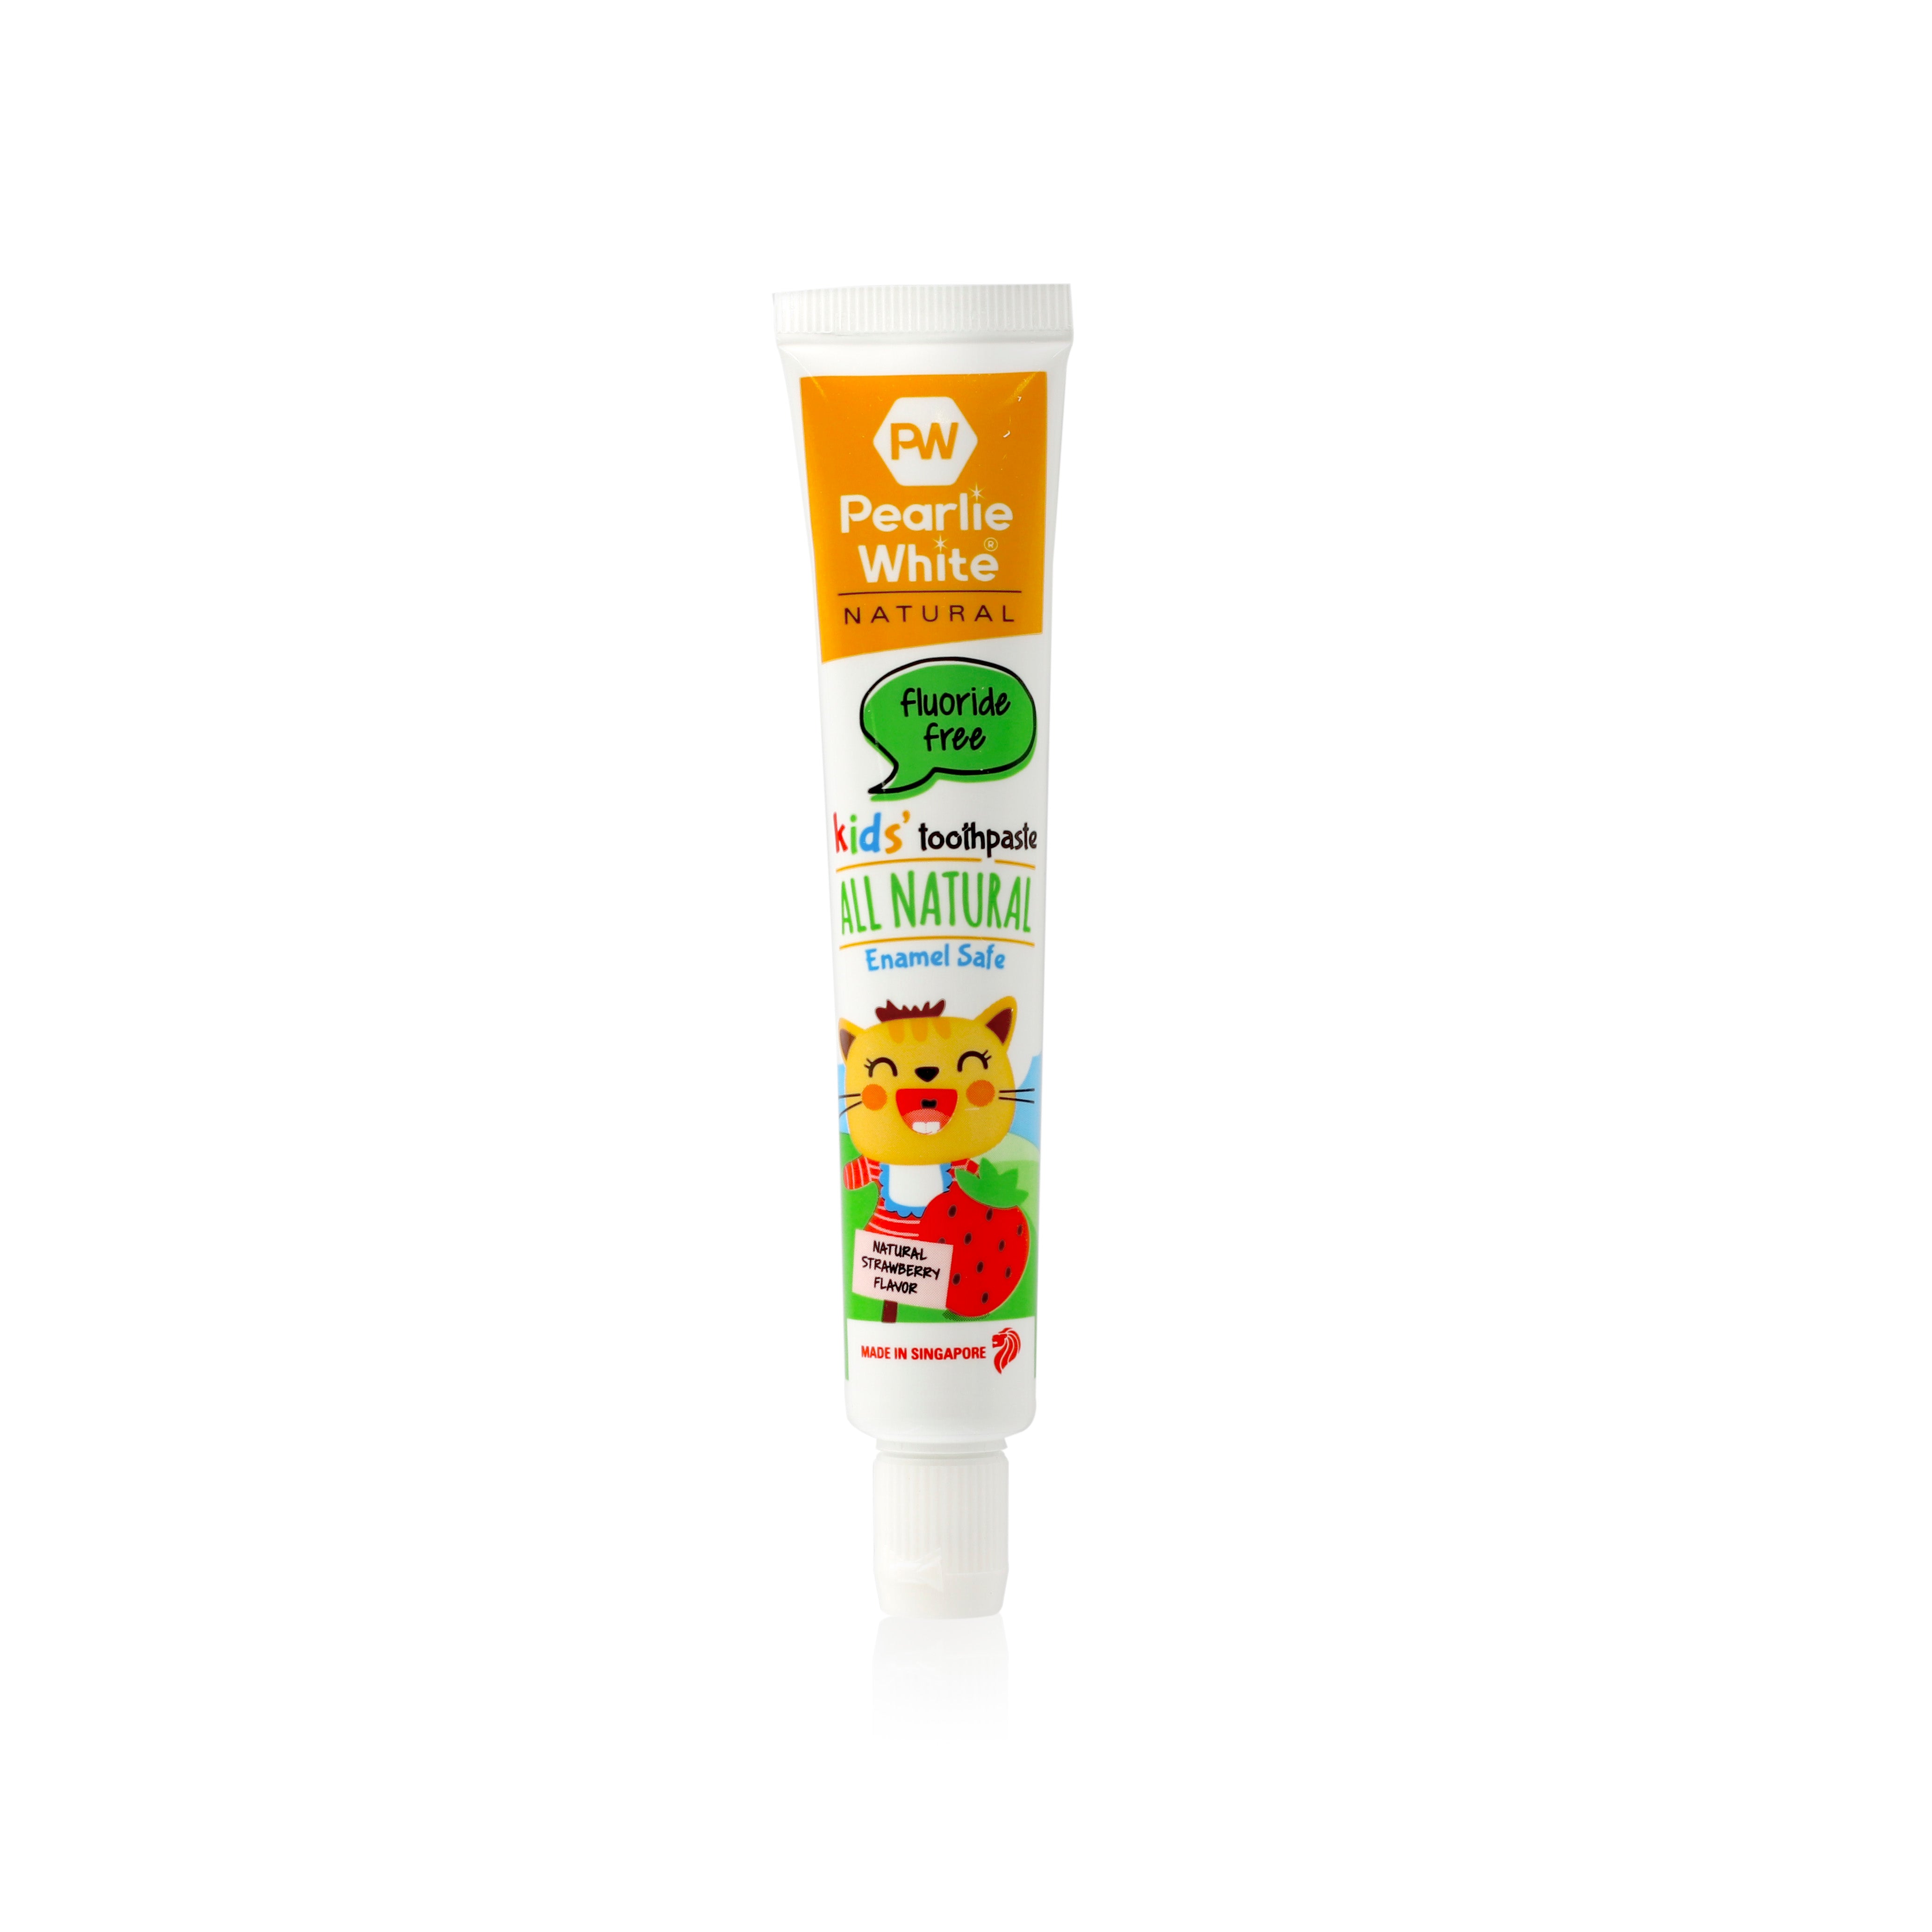 All Natural Enamel Safe Kids’ Toothpaste (Strawberry) 45g- Triple Pack